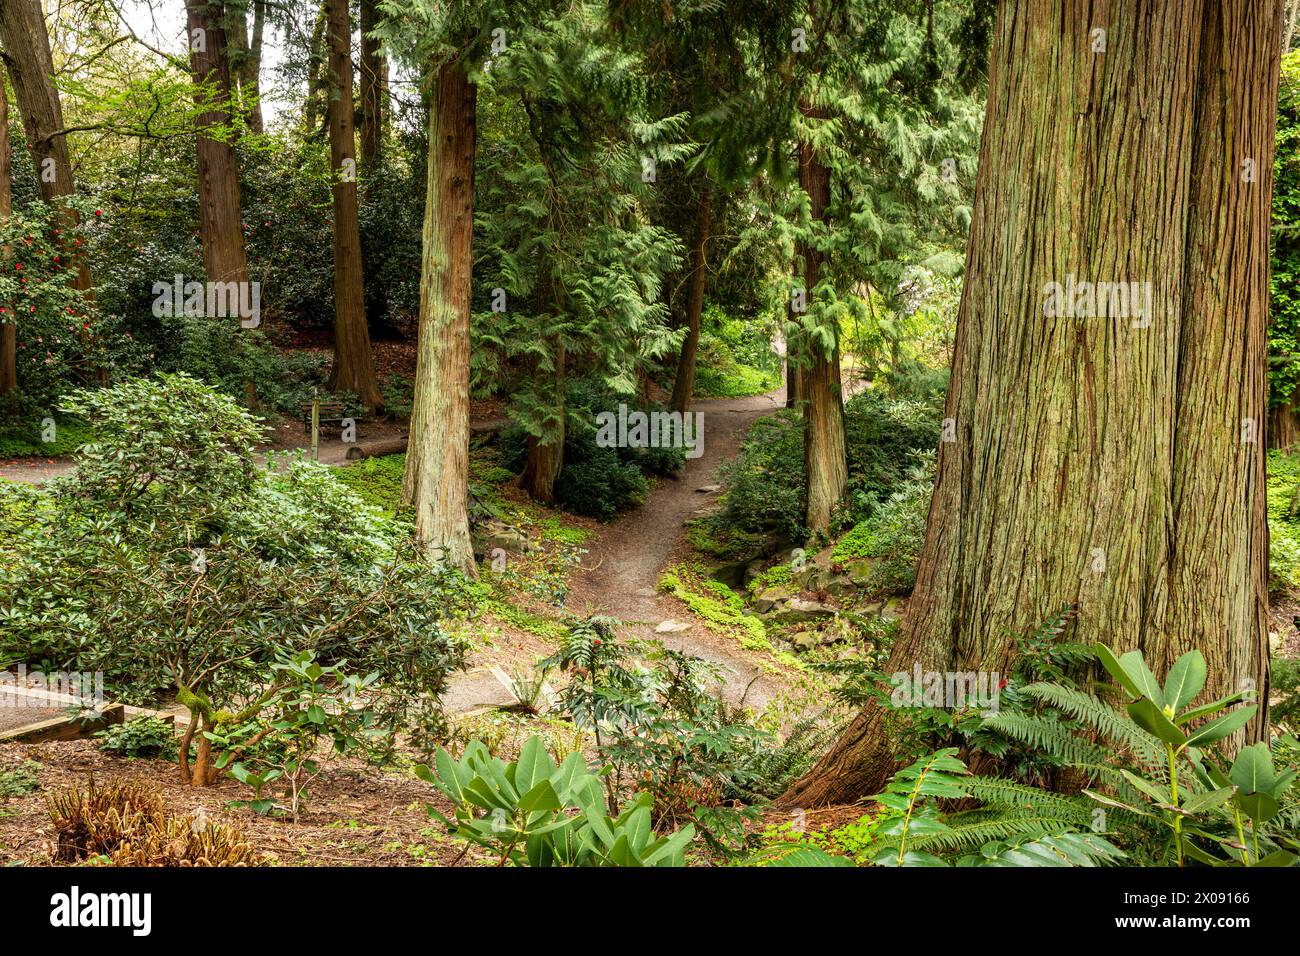 WA25163-00...WASHINGTON - Trail through a northwest forest including Western Red Cedars, Western Sword ferns and rhododendrons. Stock Photo